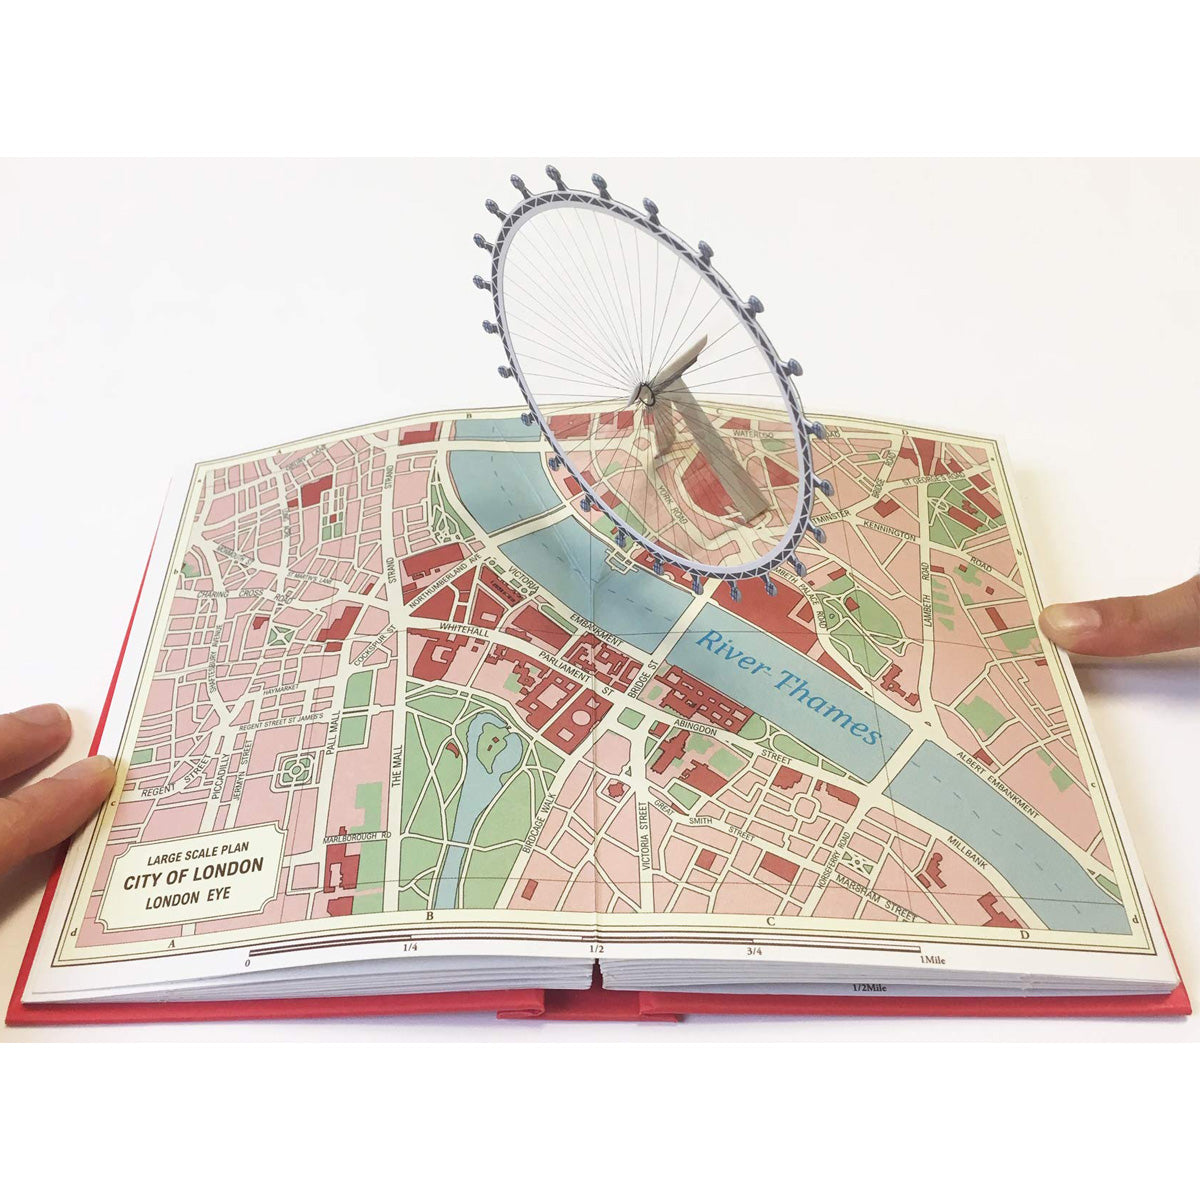 London Pop-Up Book by Dominique Ehrhard